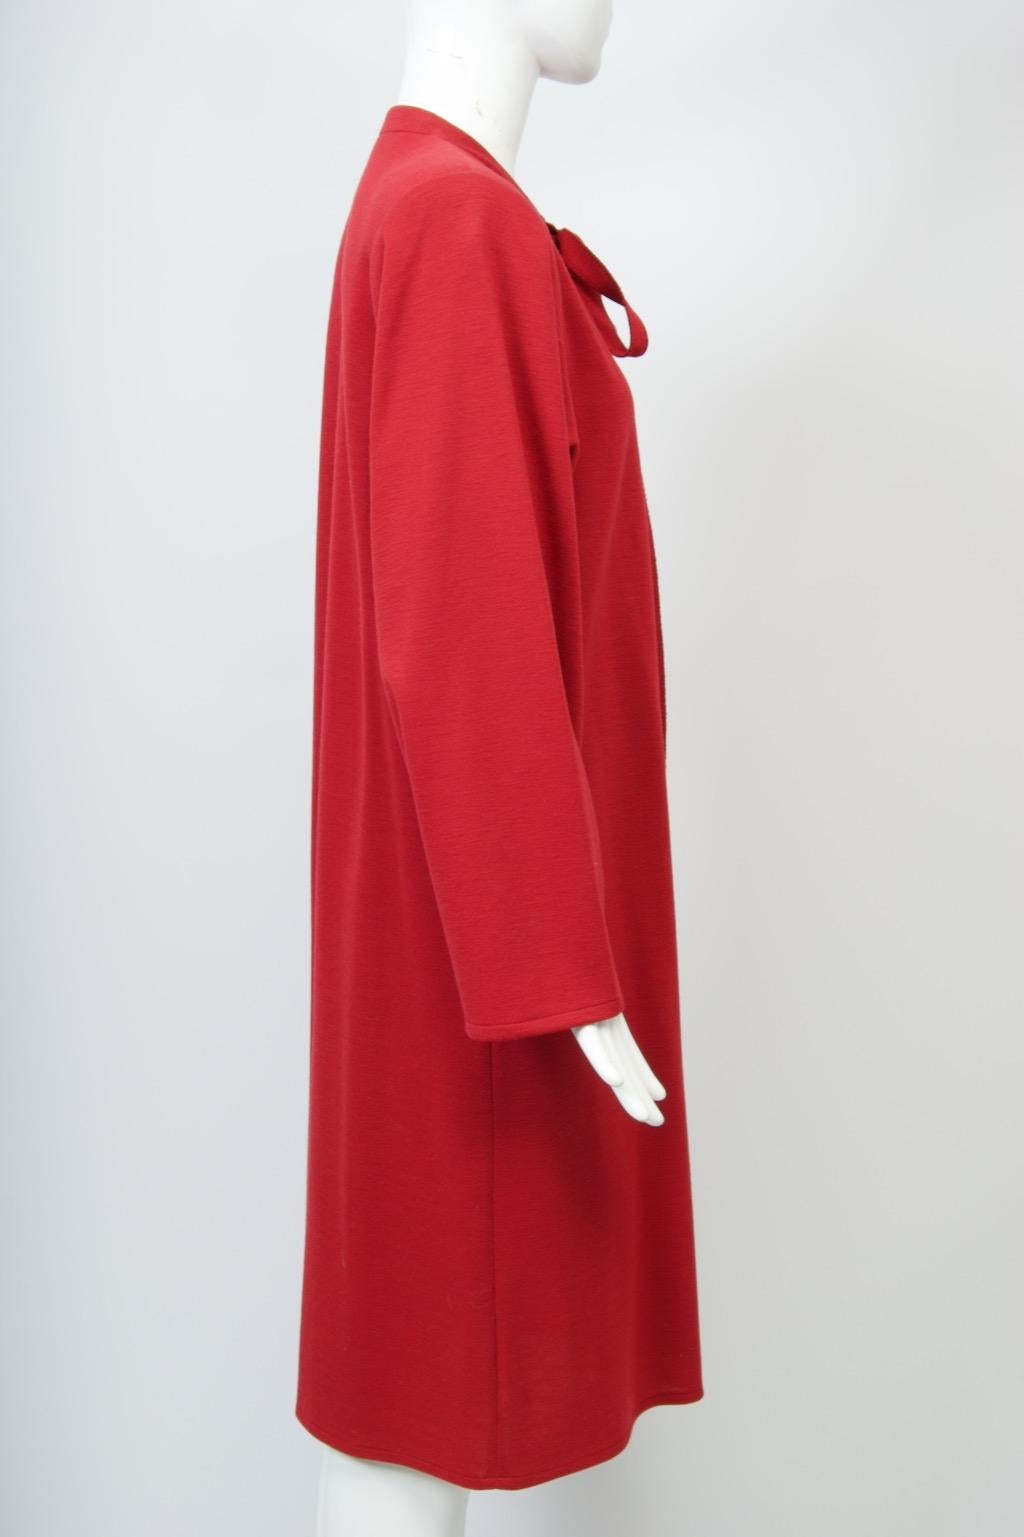 Sonia Rykiel Red Knit Coat/Dress In Excellent Condition For Sale In Alford, MA